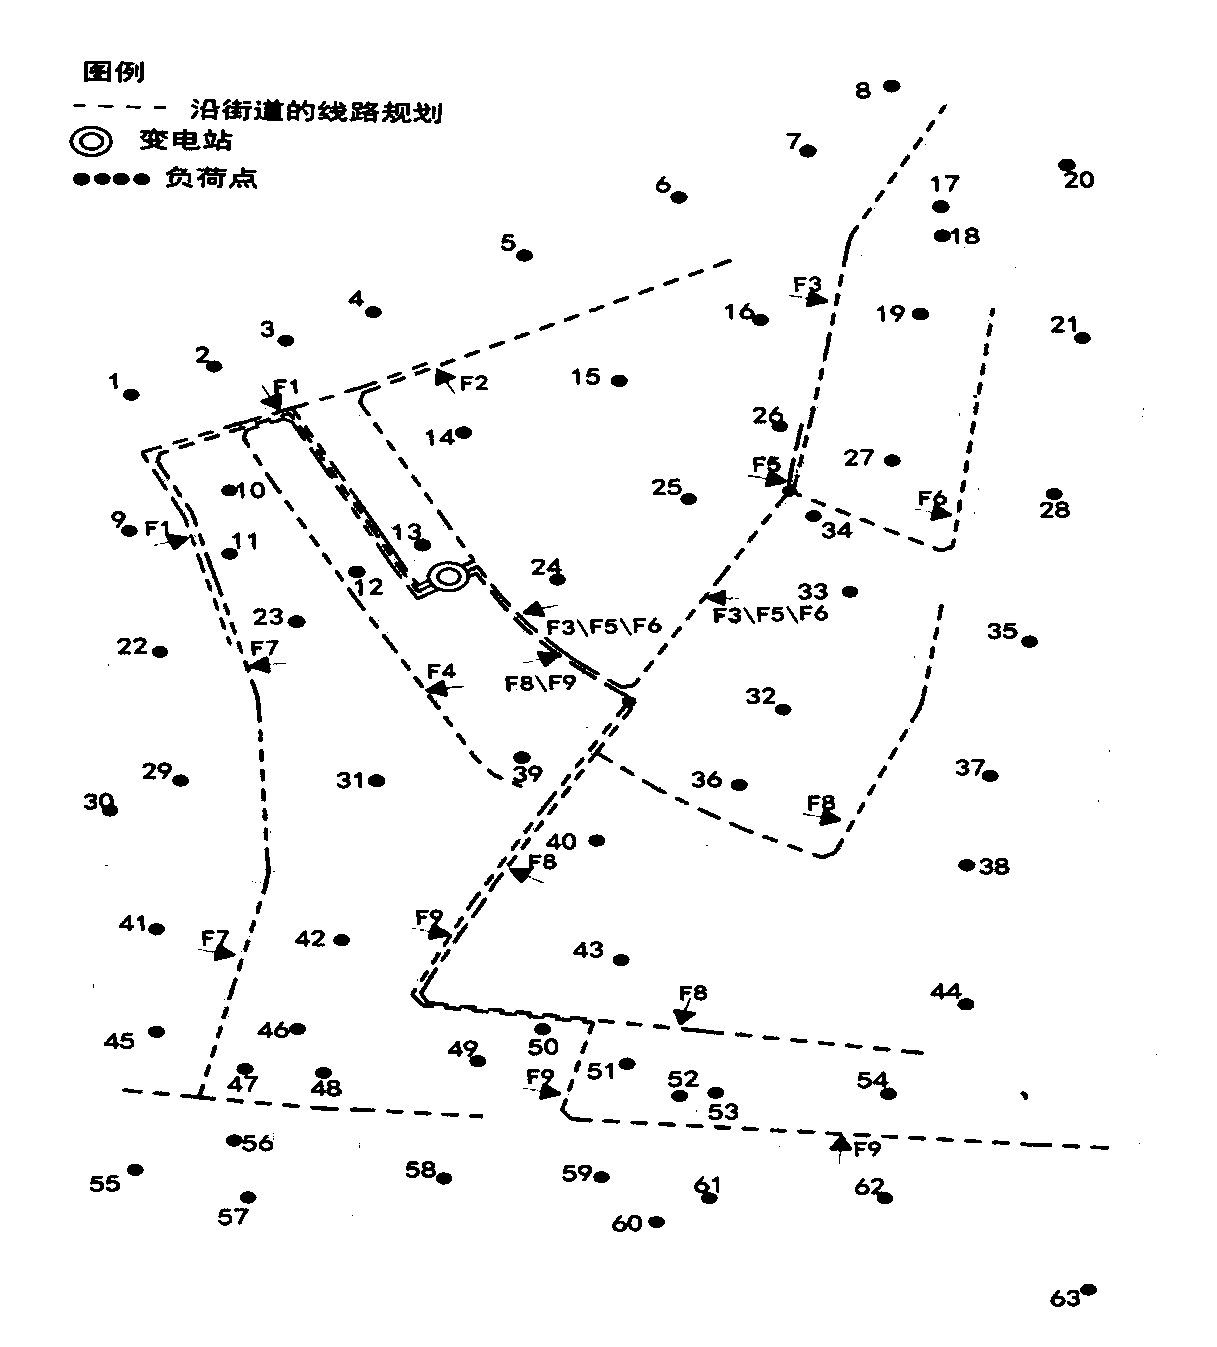 Distribution network frame planning method for conducting clustering and partitioning on basis of load points and considering geographical factors